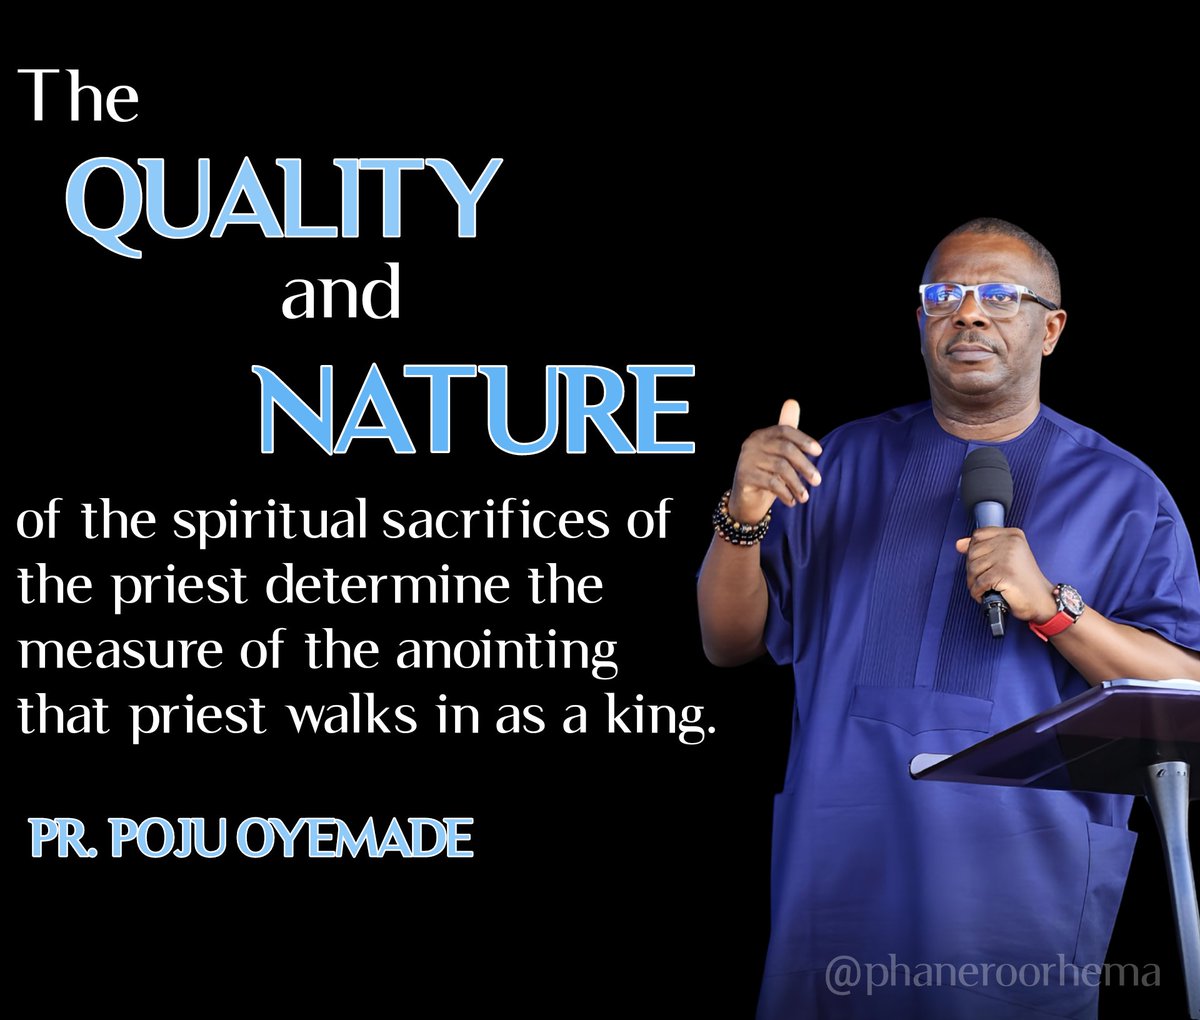 The quality and nature of the spiritual sacrifices of the priest determine the measure of the anointing that priest walks in as a king.  

Pr. Poju Oyemade 
#Phaneroorhema
#MenGatherVII 
#ThePriest